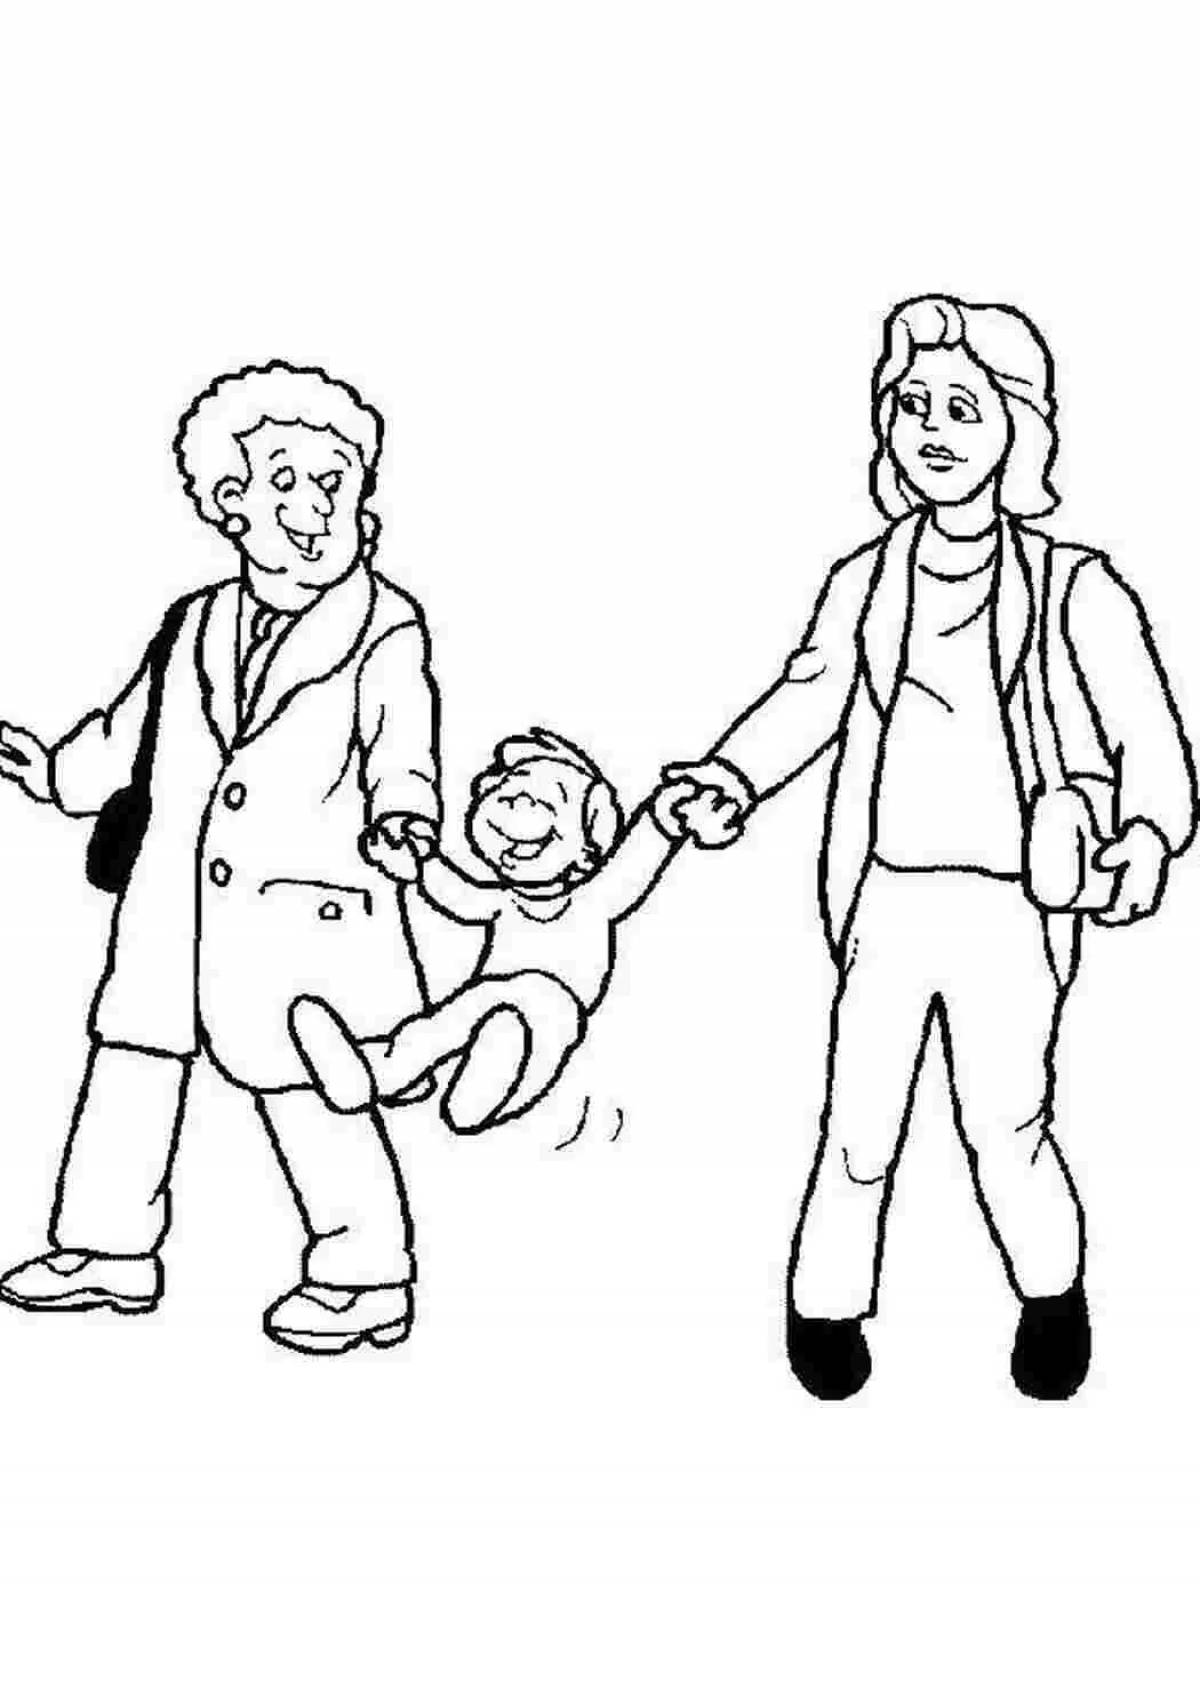 Charming man coloring page